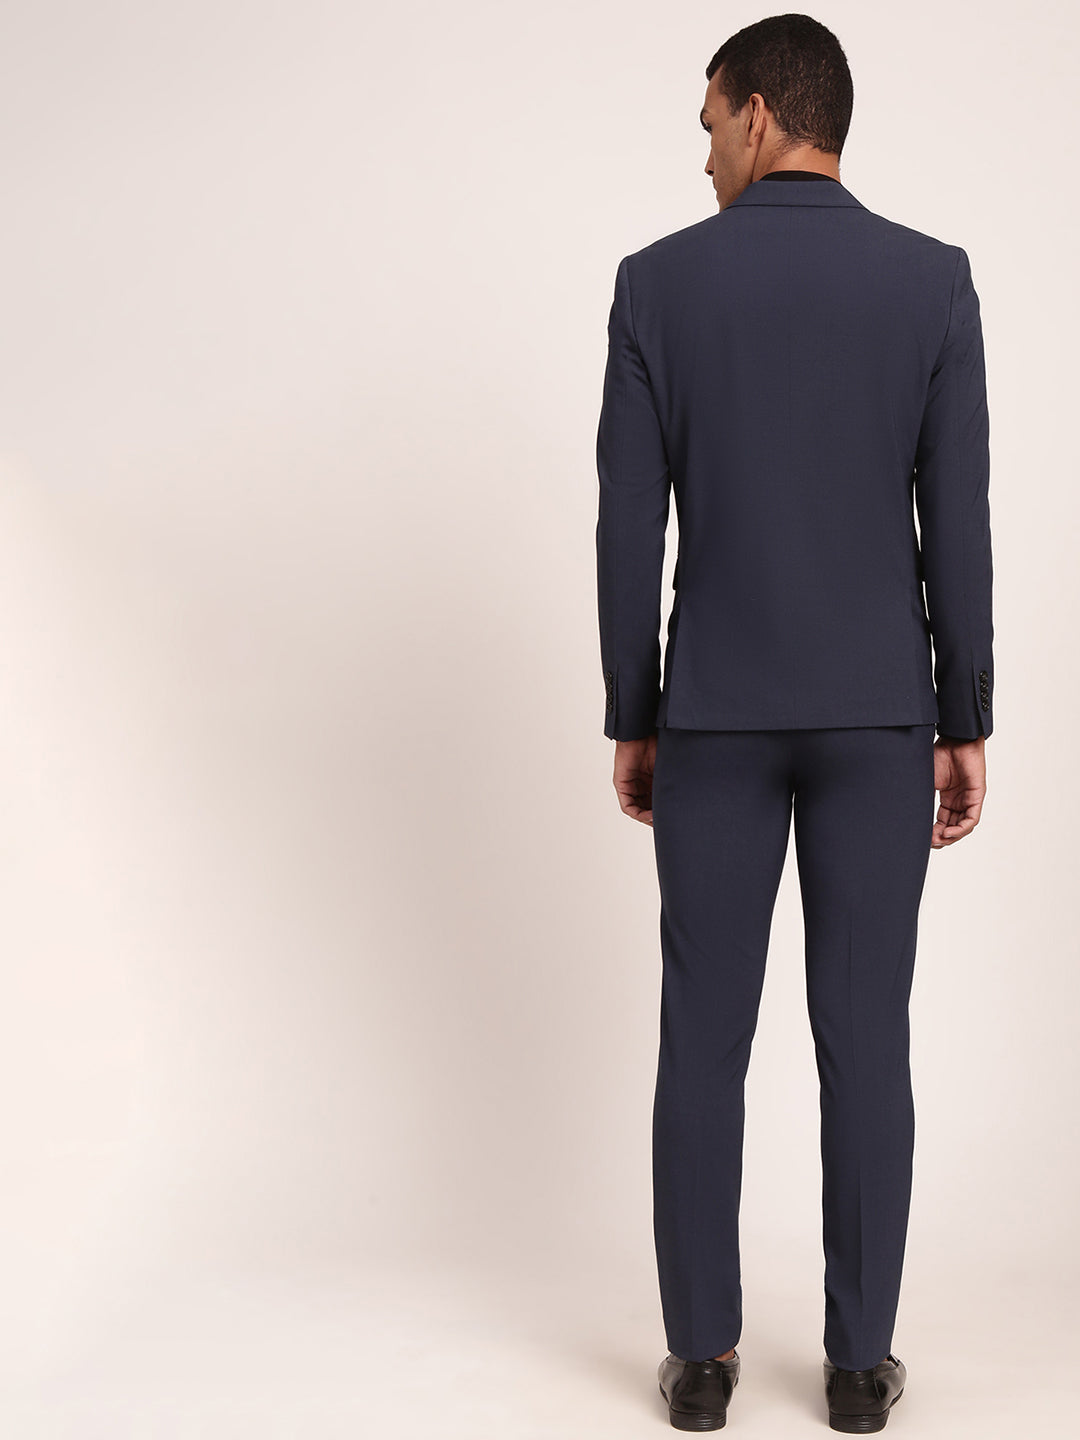 Blue Mens 5 Piece Suit, Linen at Rs 1950 in Ludhiana